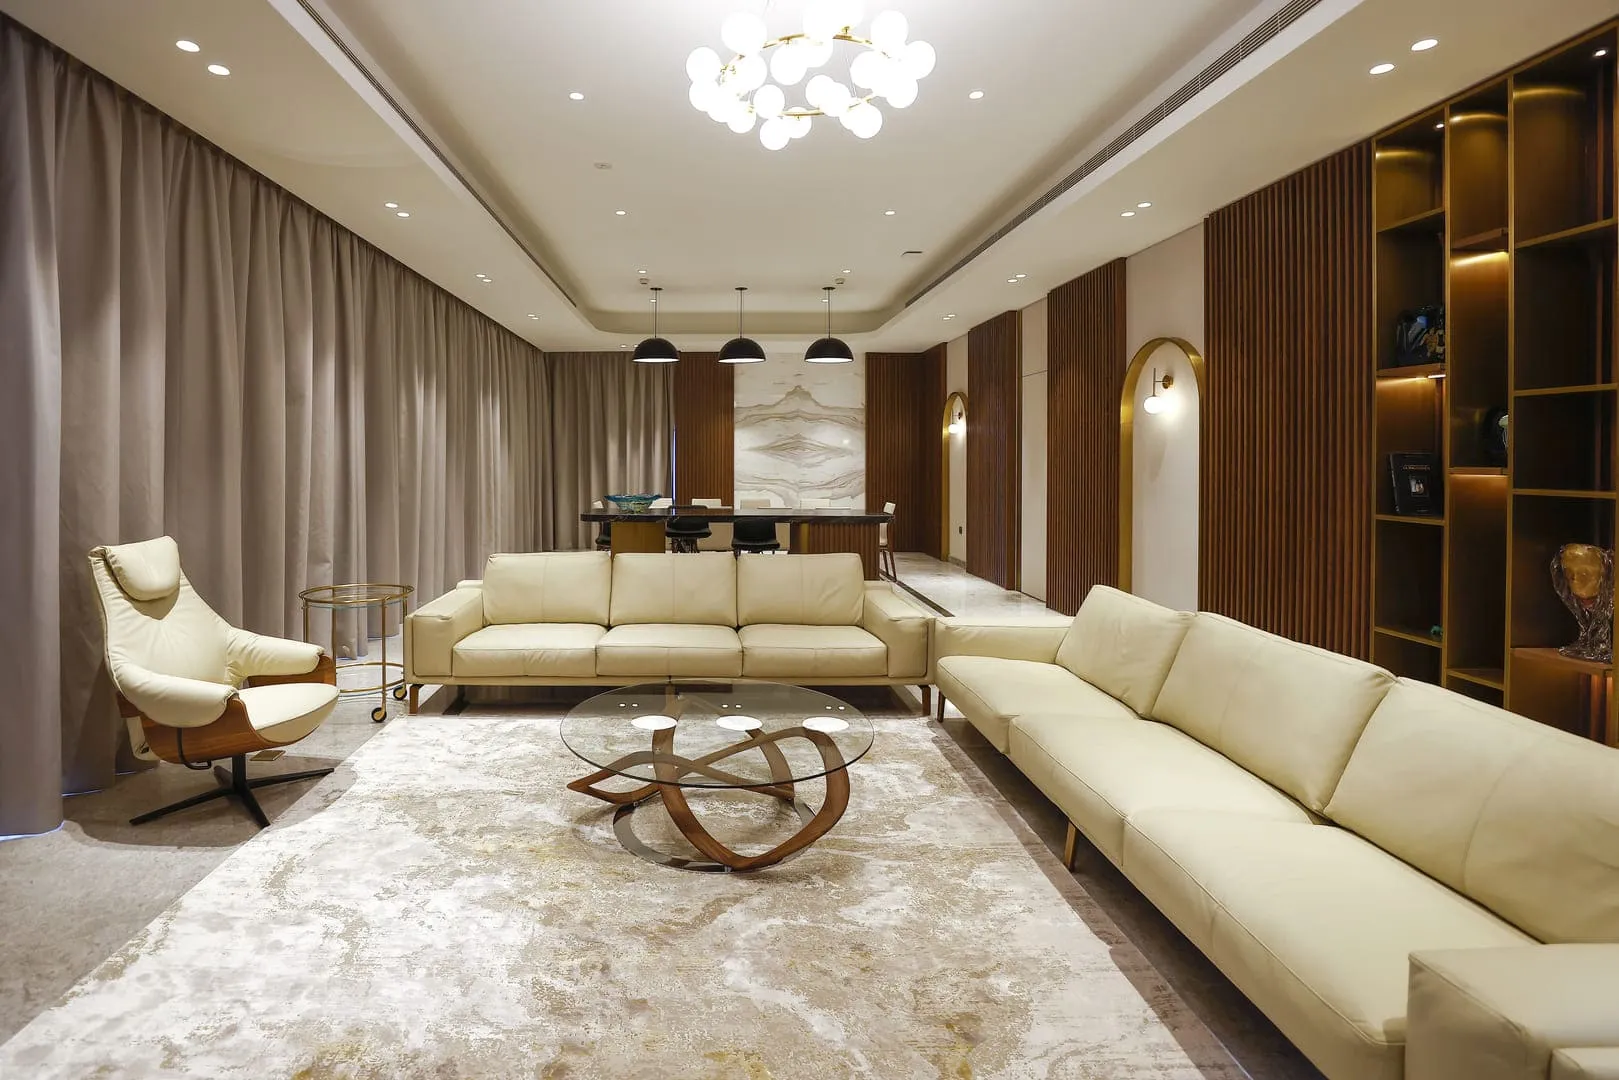 A cozy living room with a spacious sofa and a stylish coffee table. Perfect for relaxation and gatherings.